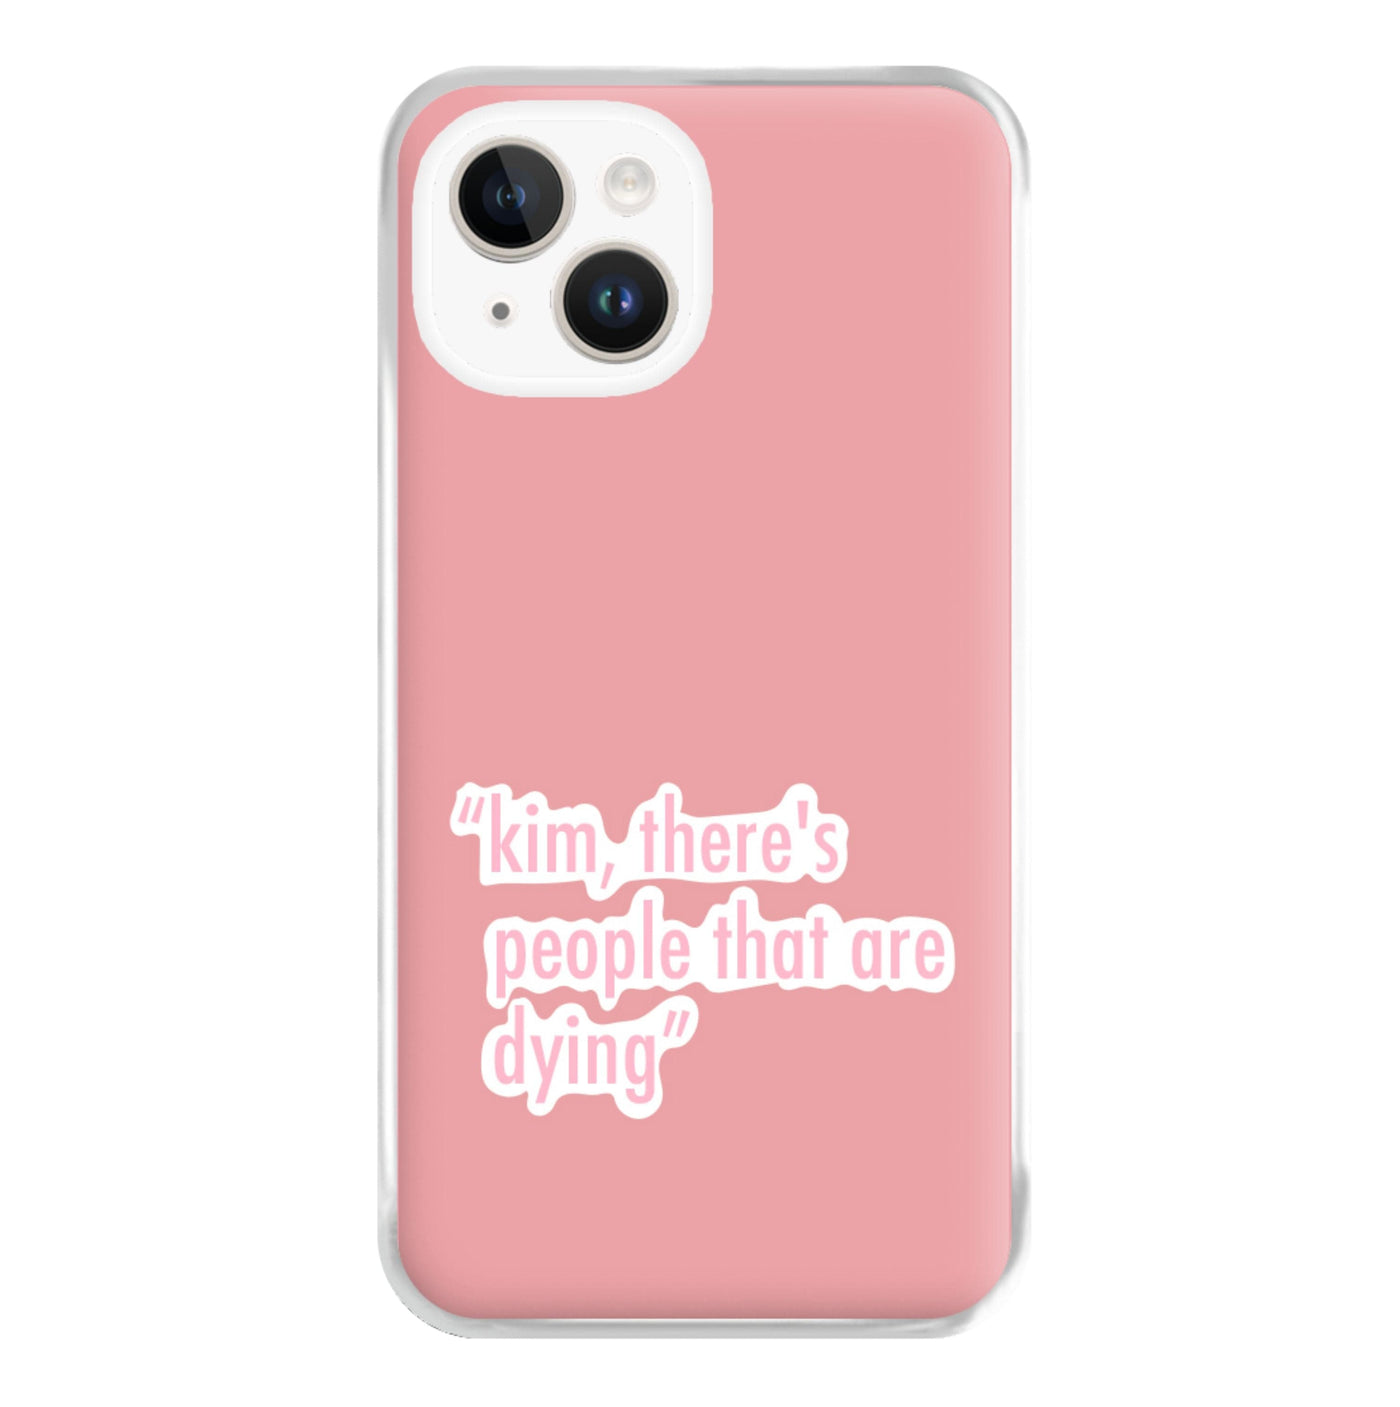 Kim, There's People That Are Dying - Kardashian Phone Case